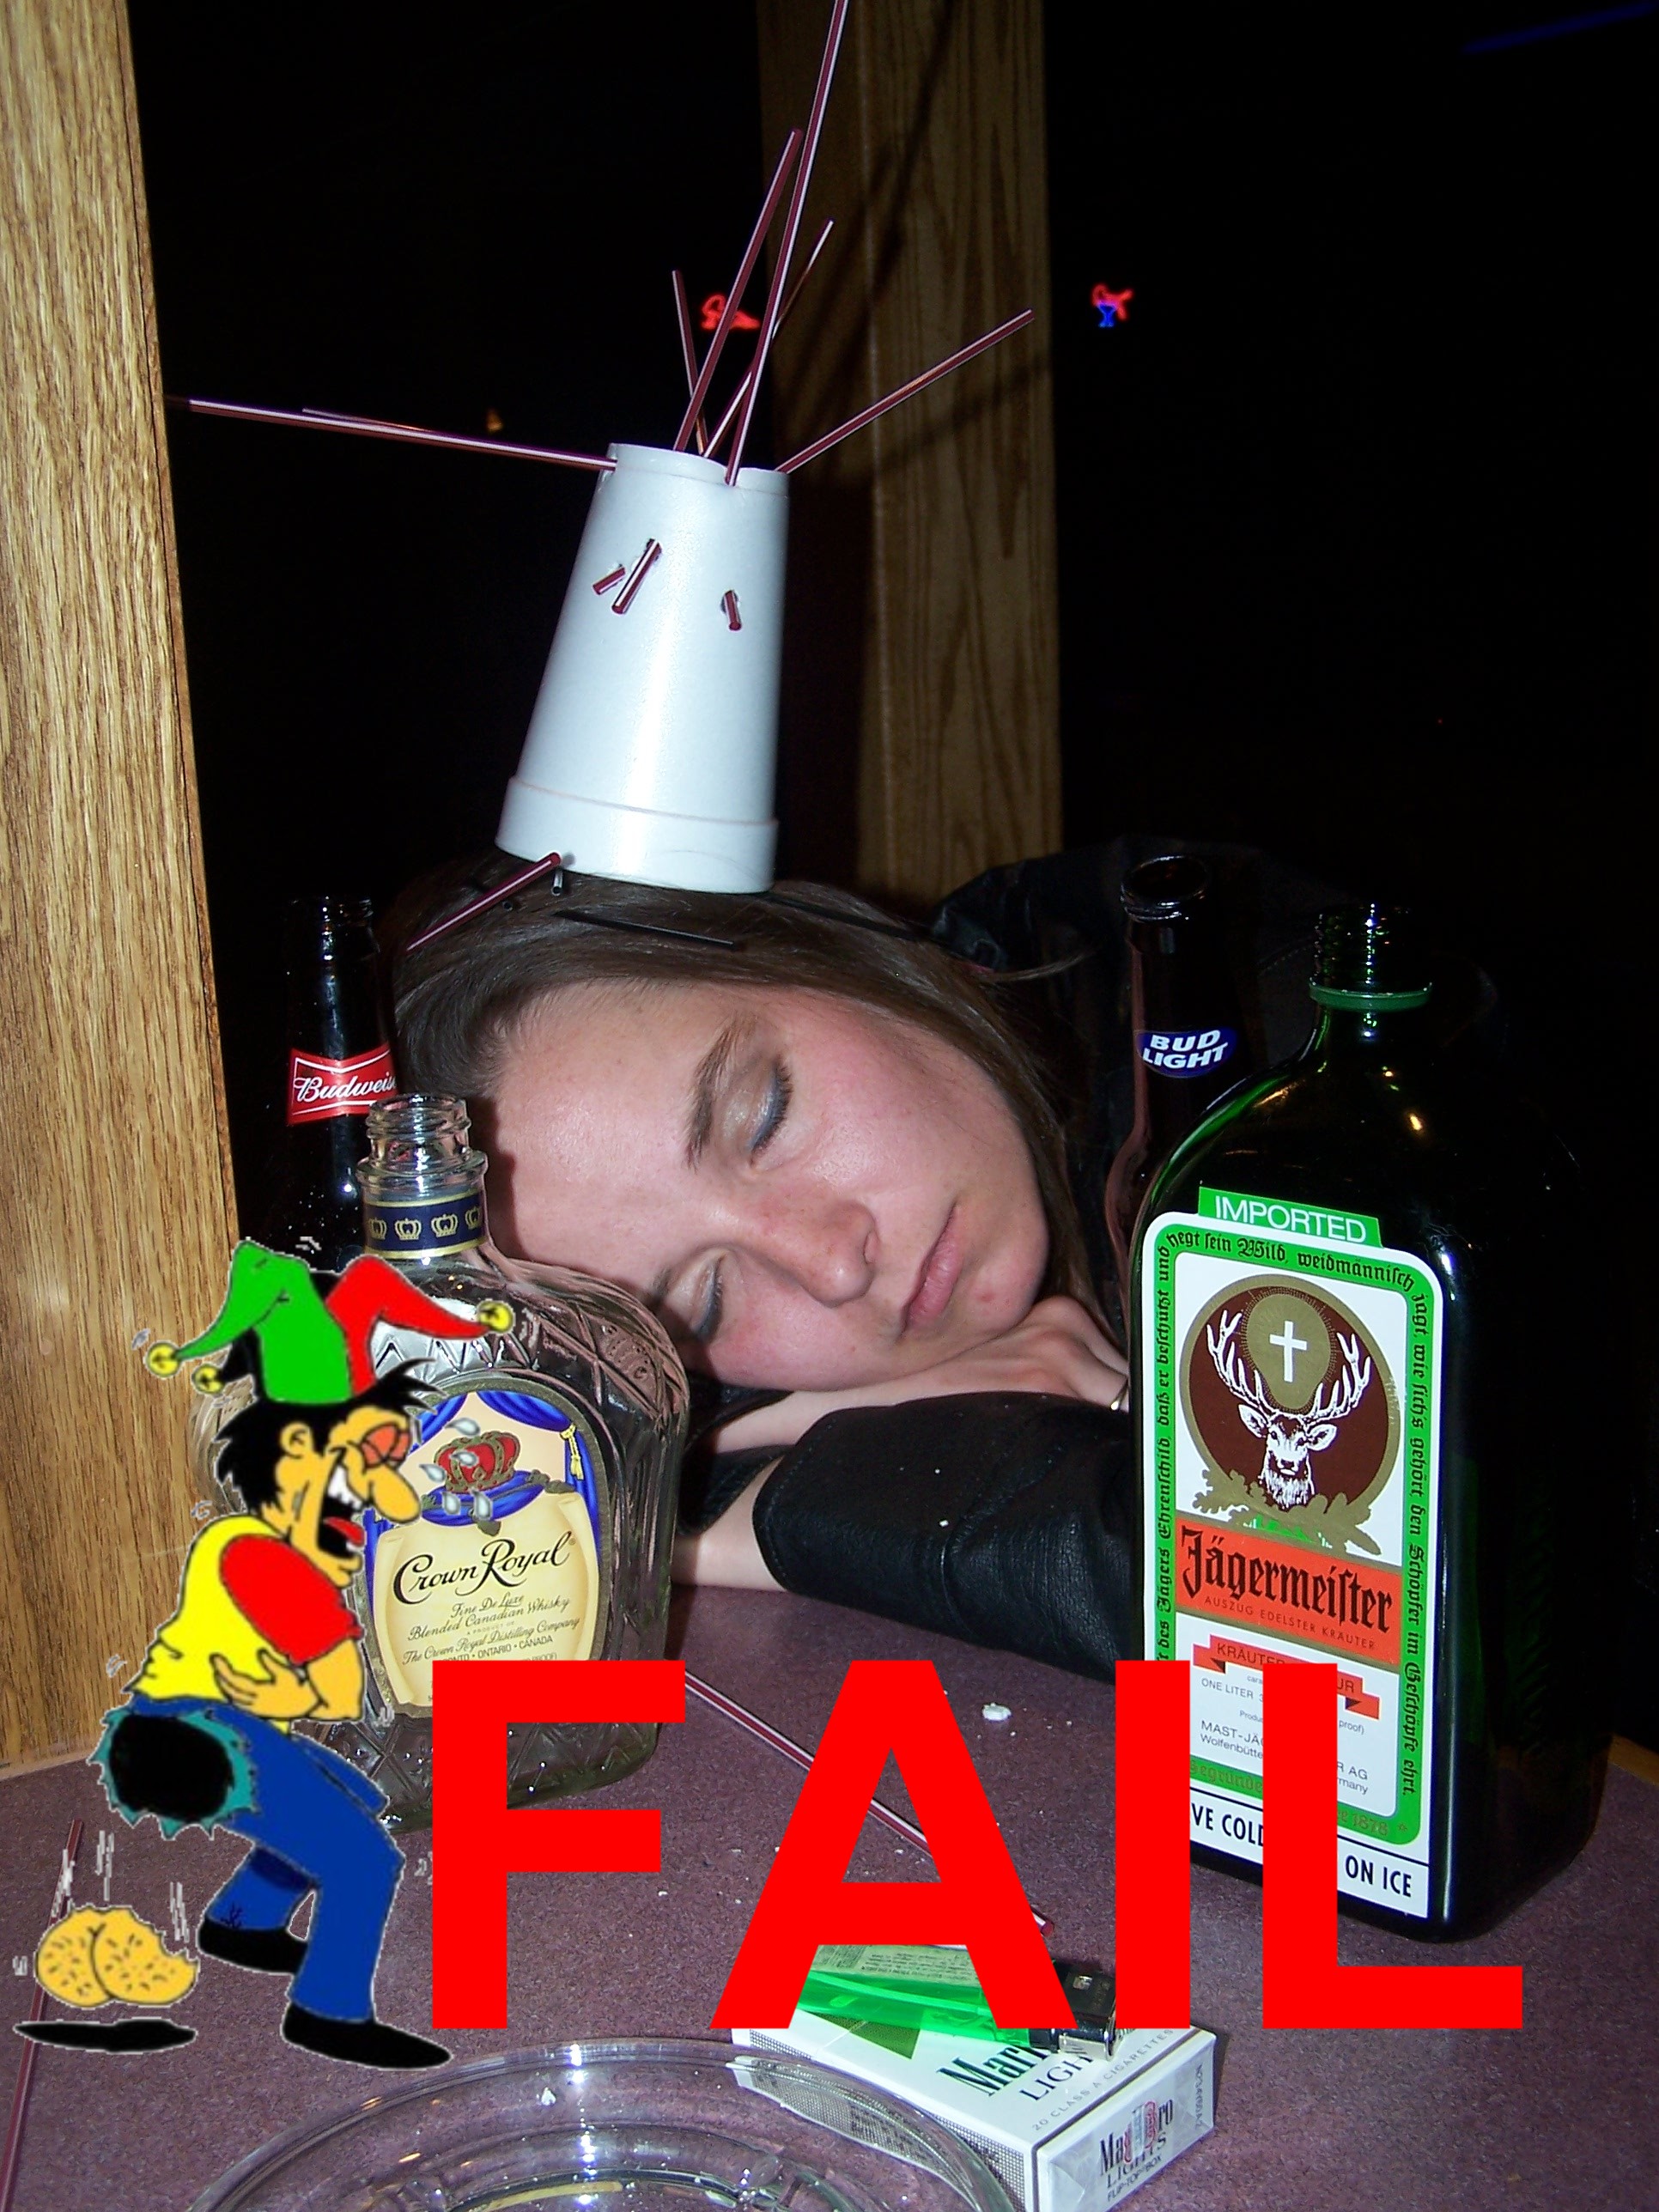 Girl passed out with stupid cup on her head.